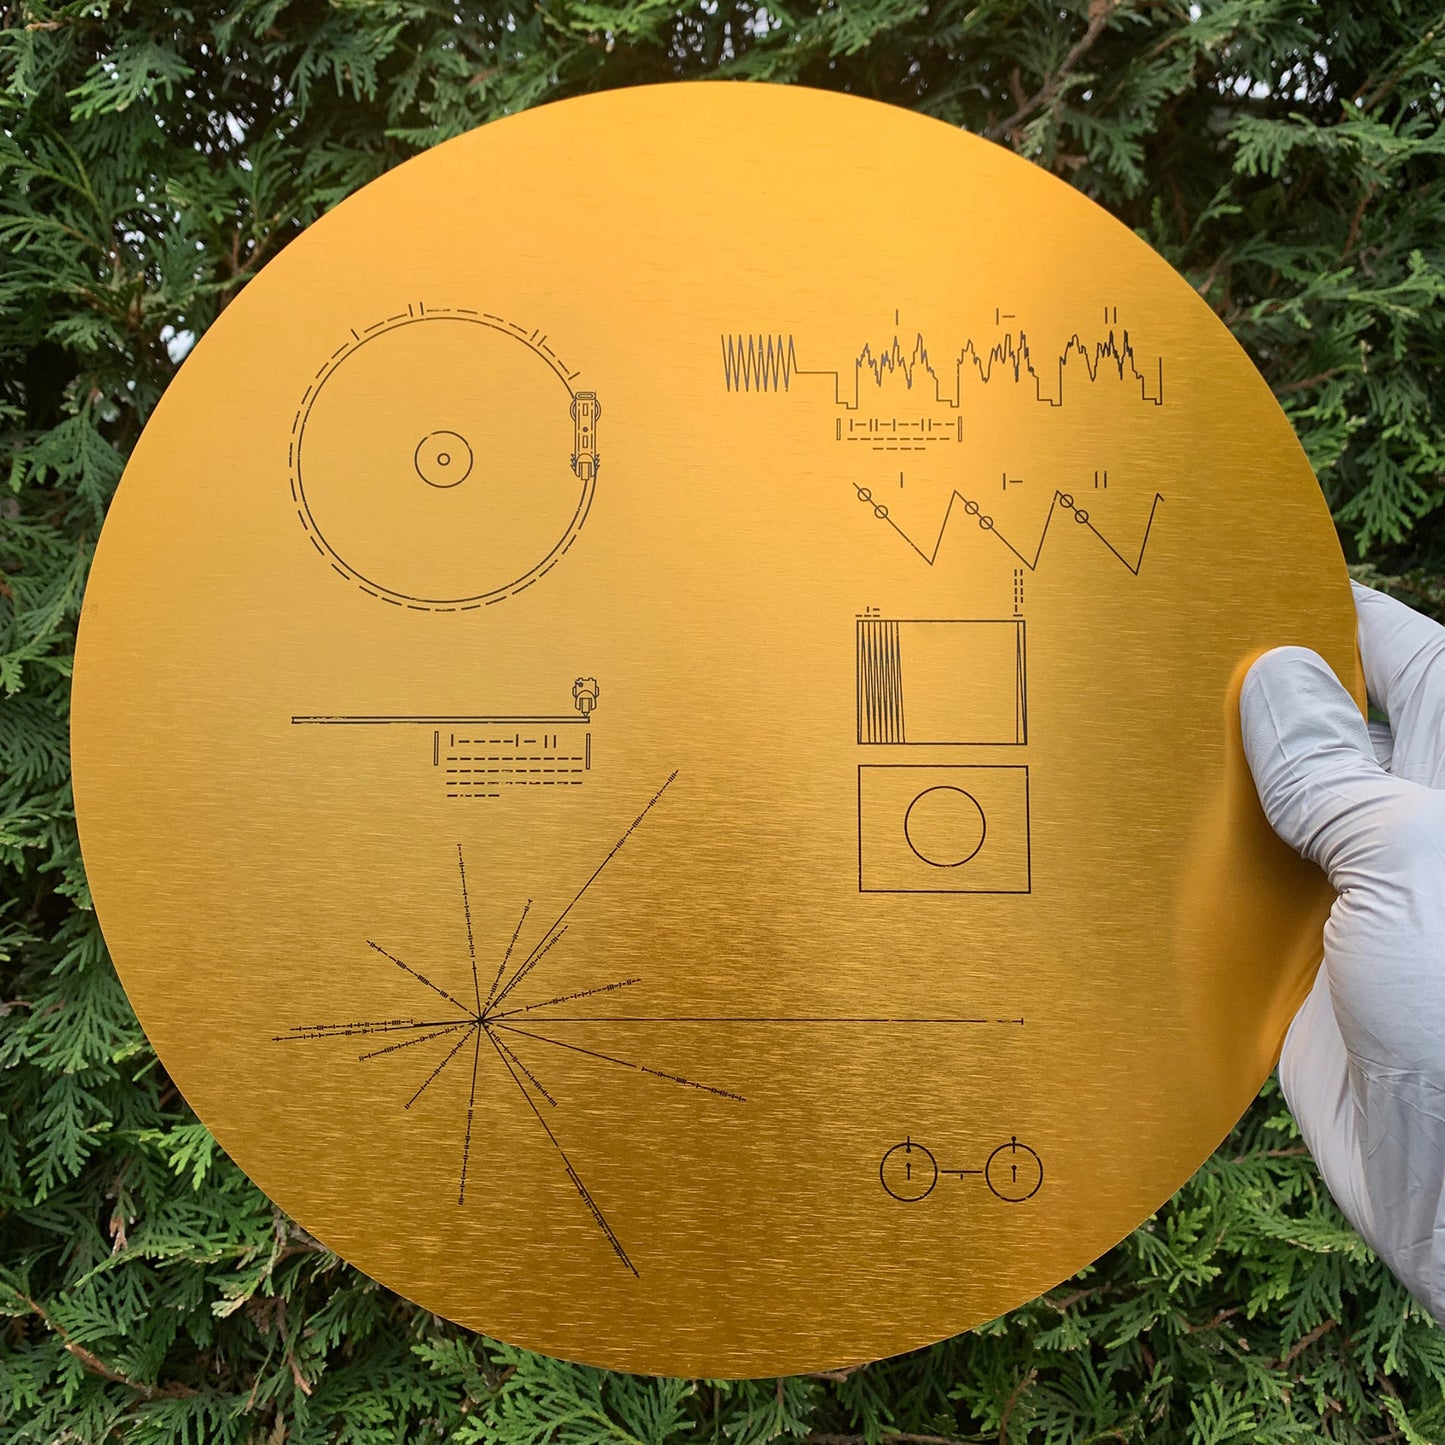 Voyager Golden Record Cover Full Size Metal Replica